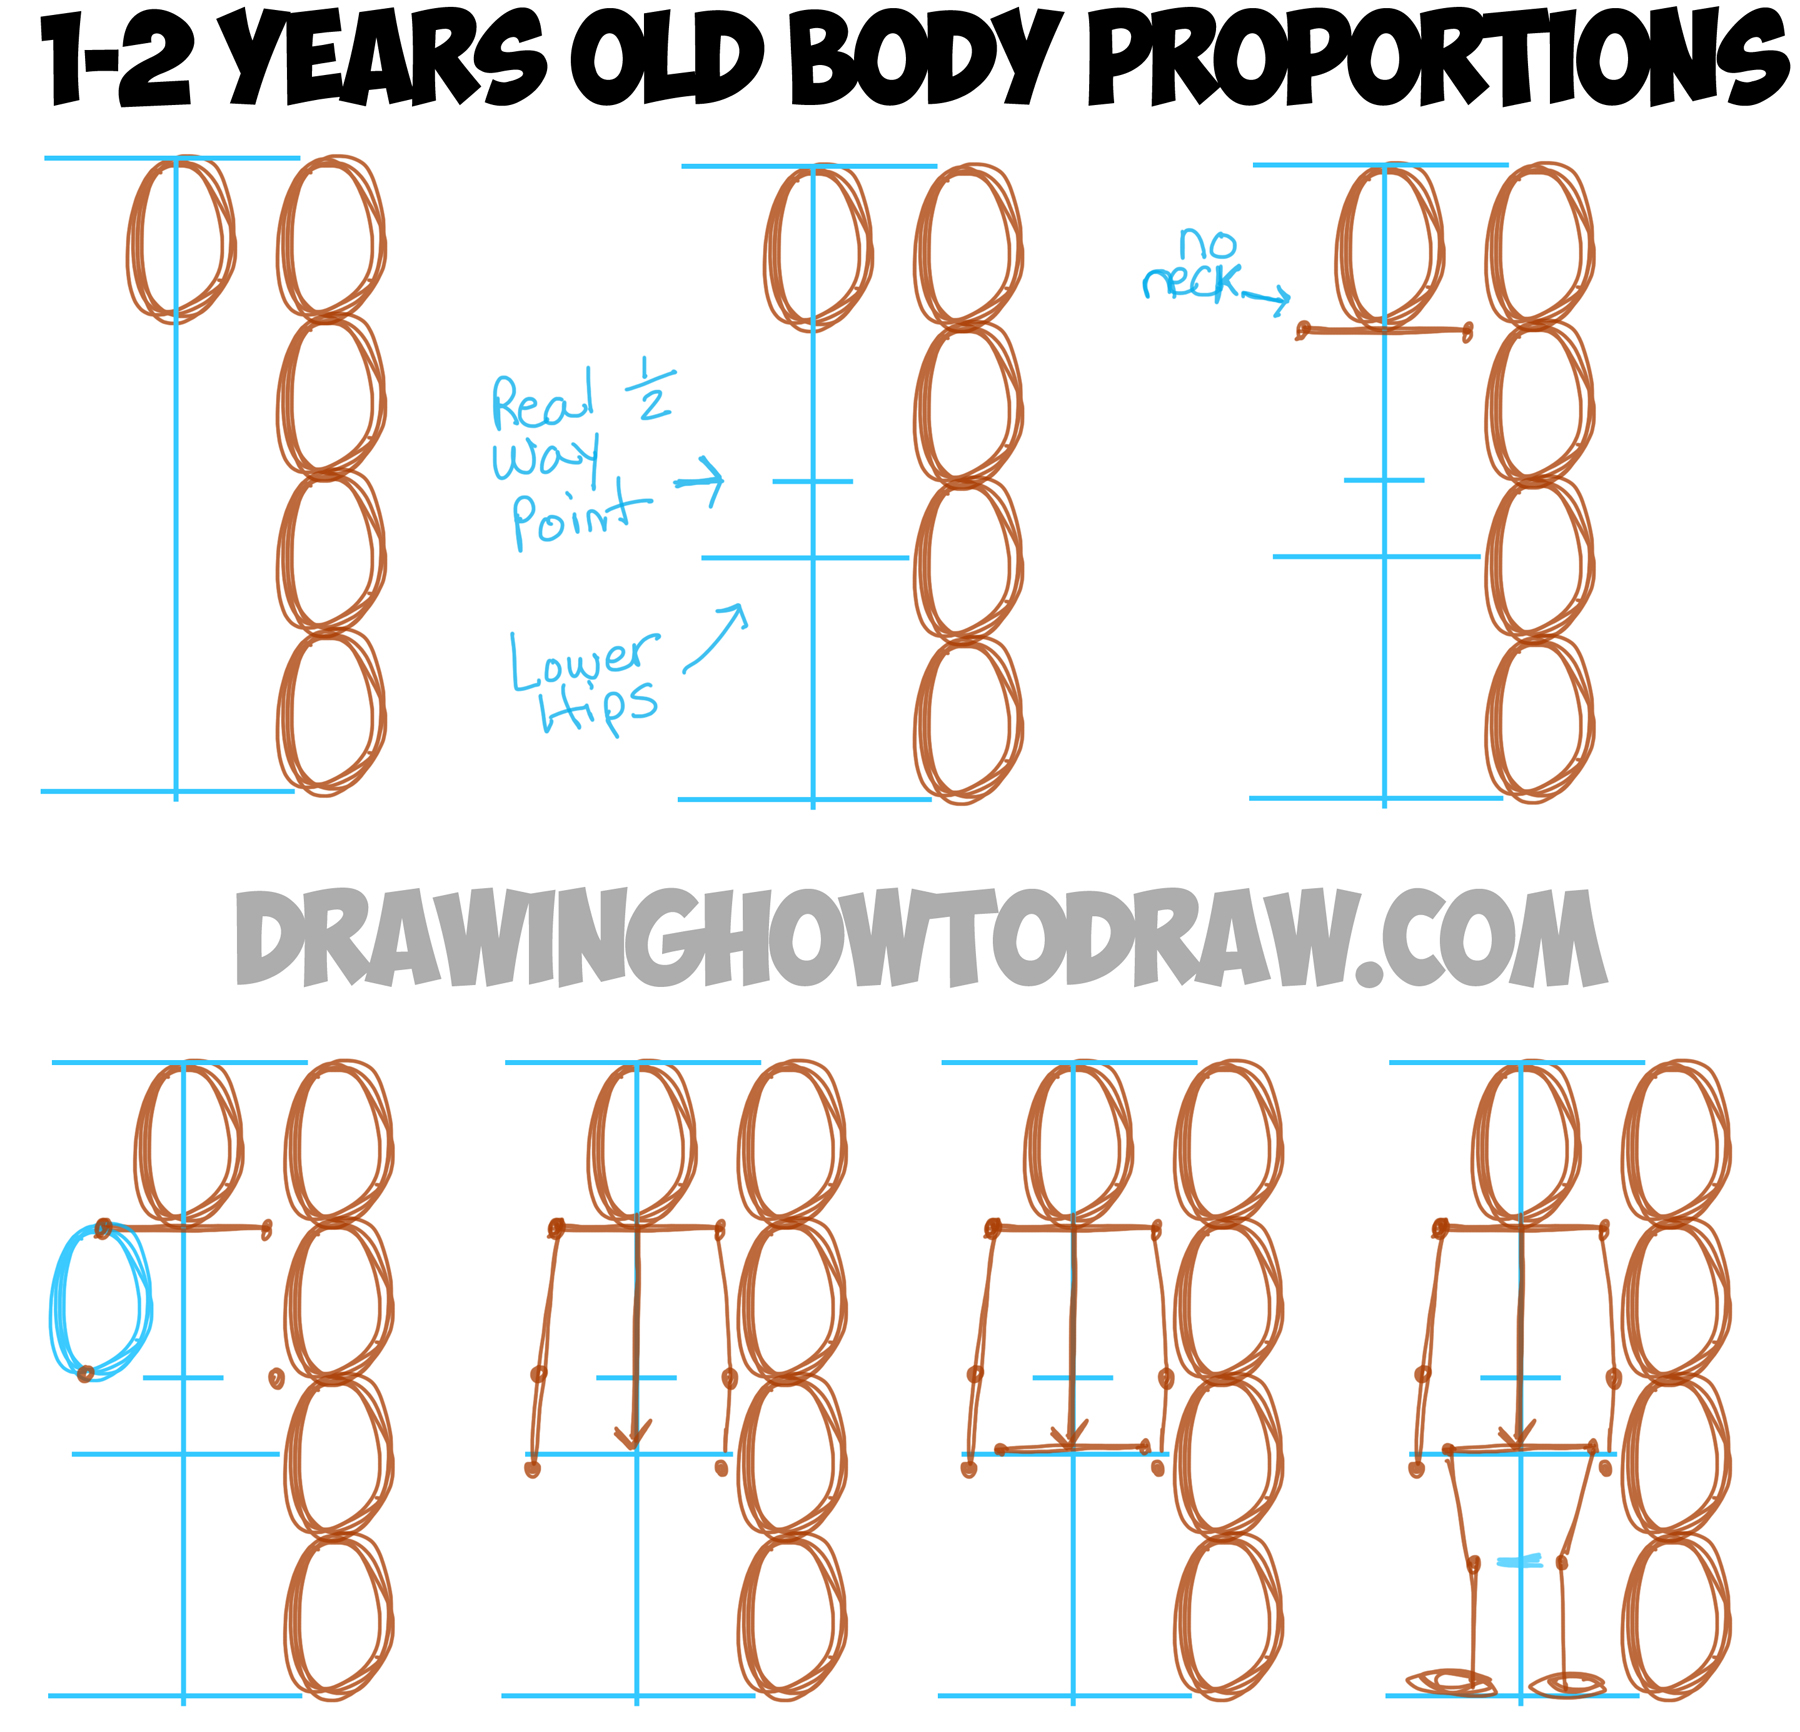 Drawing a 1-2 Year Old Child in the Correct Proportions